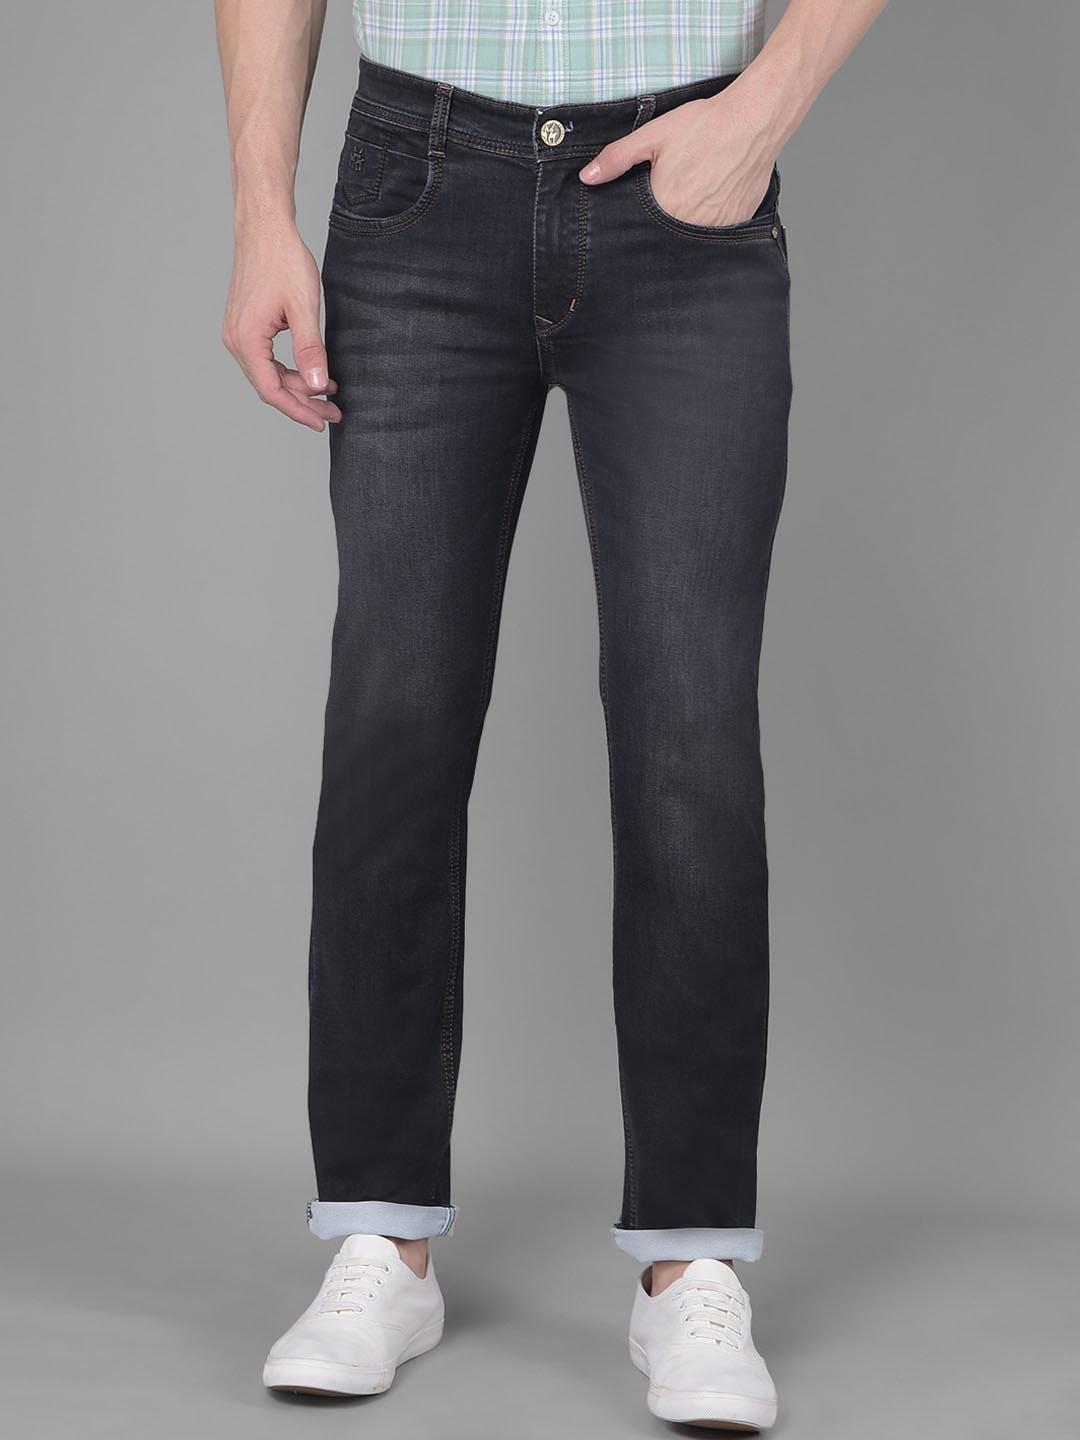 crimsoune-club-men-straight-fit-mid-rise-clean-look-heavy-fade-stretchable-jeans